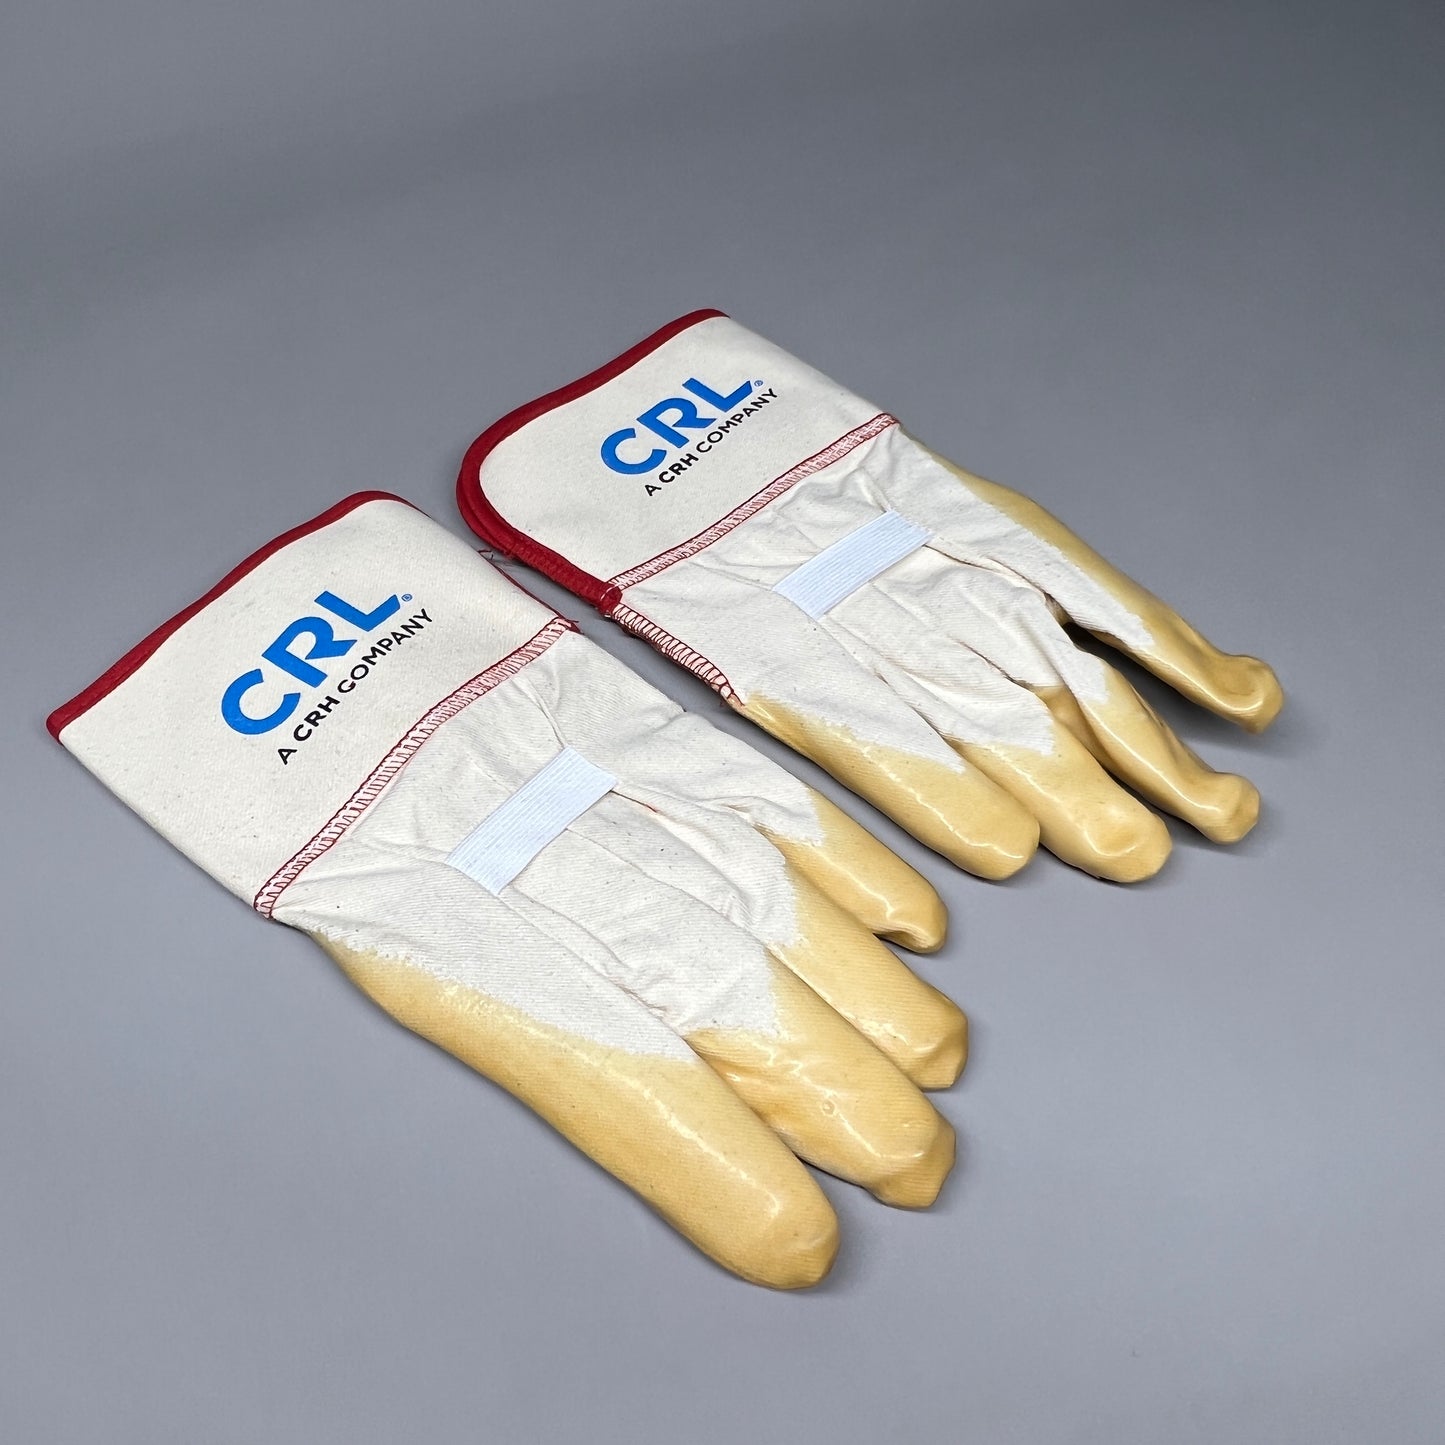 CRL Gauntlet Cuff Smooth Natural Rubber Coating Palm Gloves #12 (new)